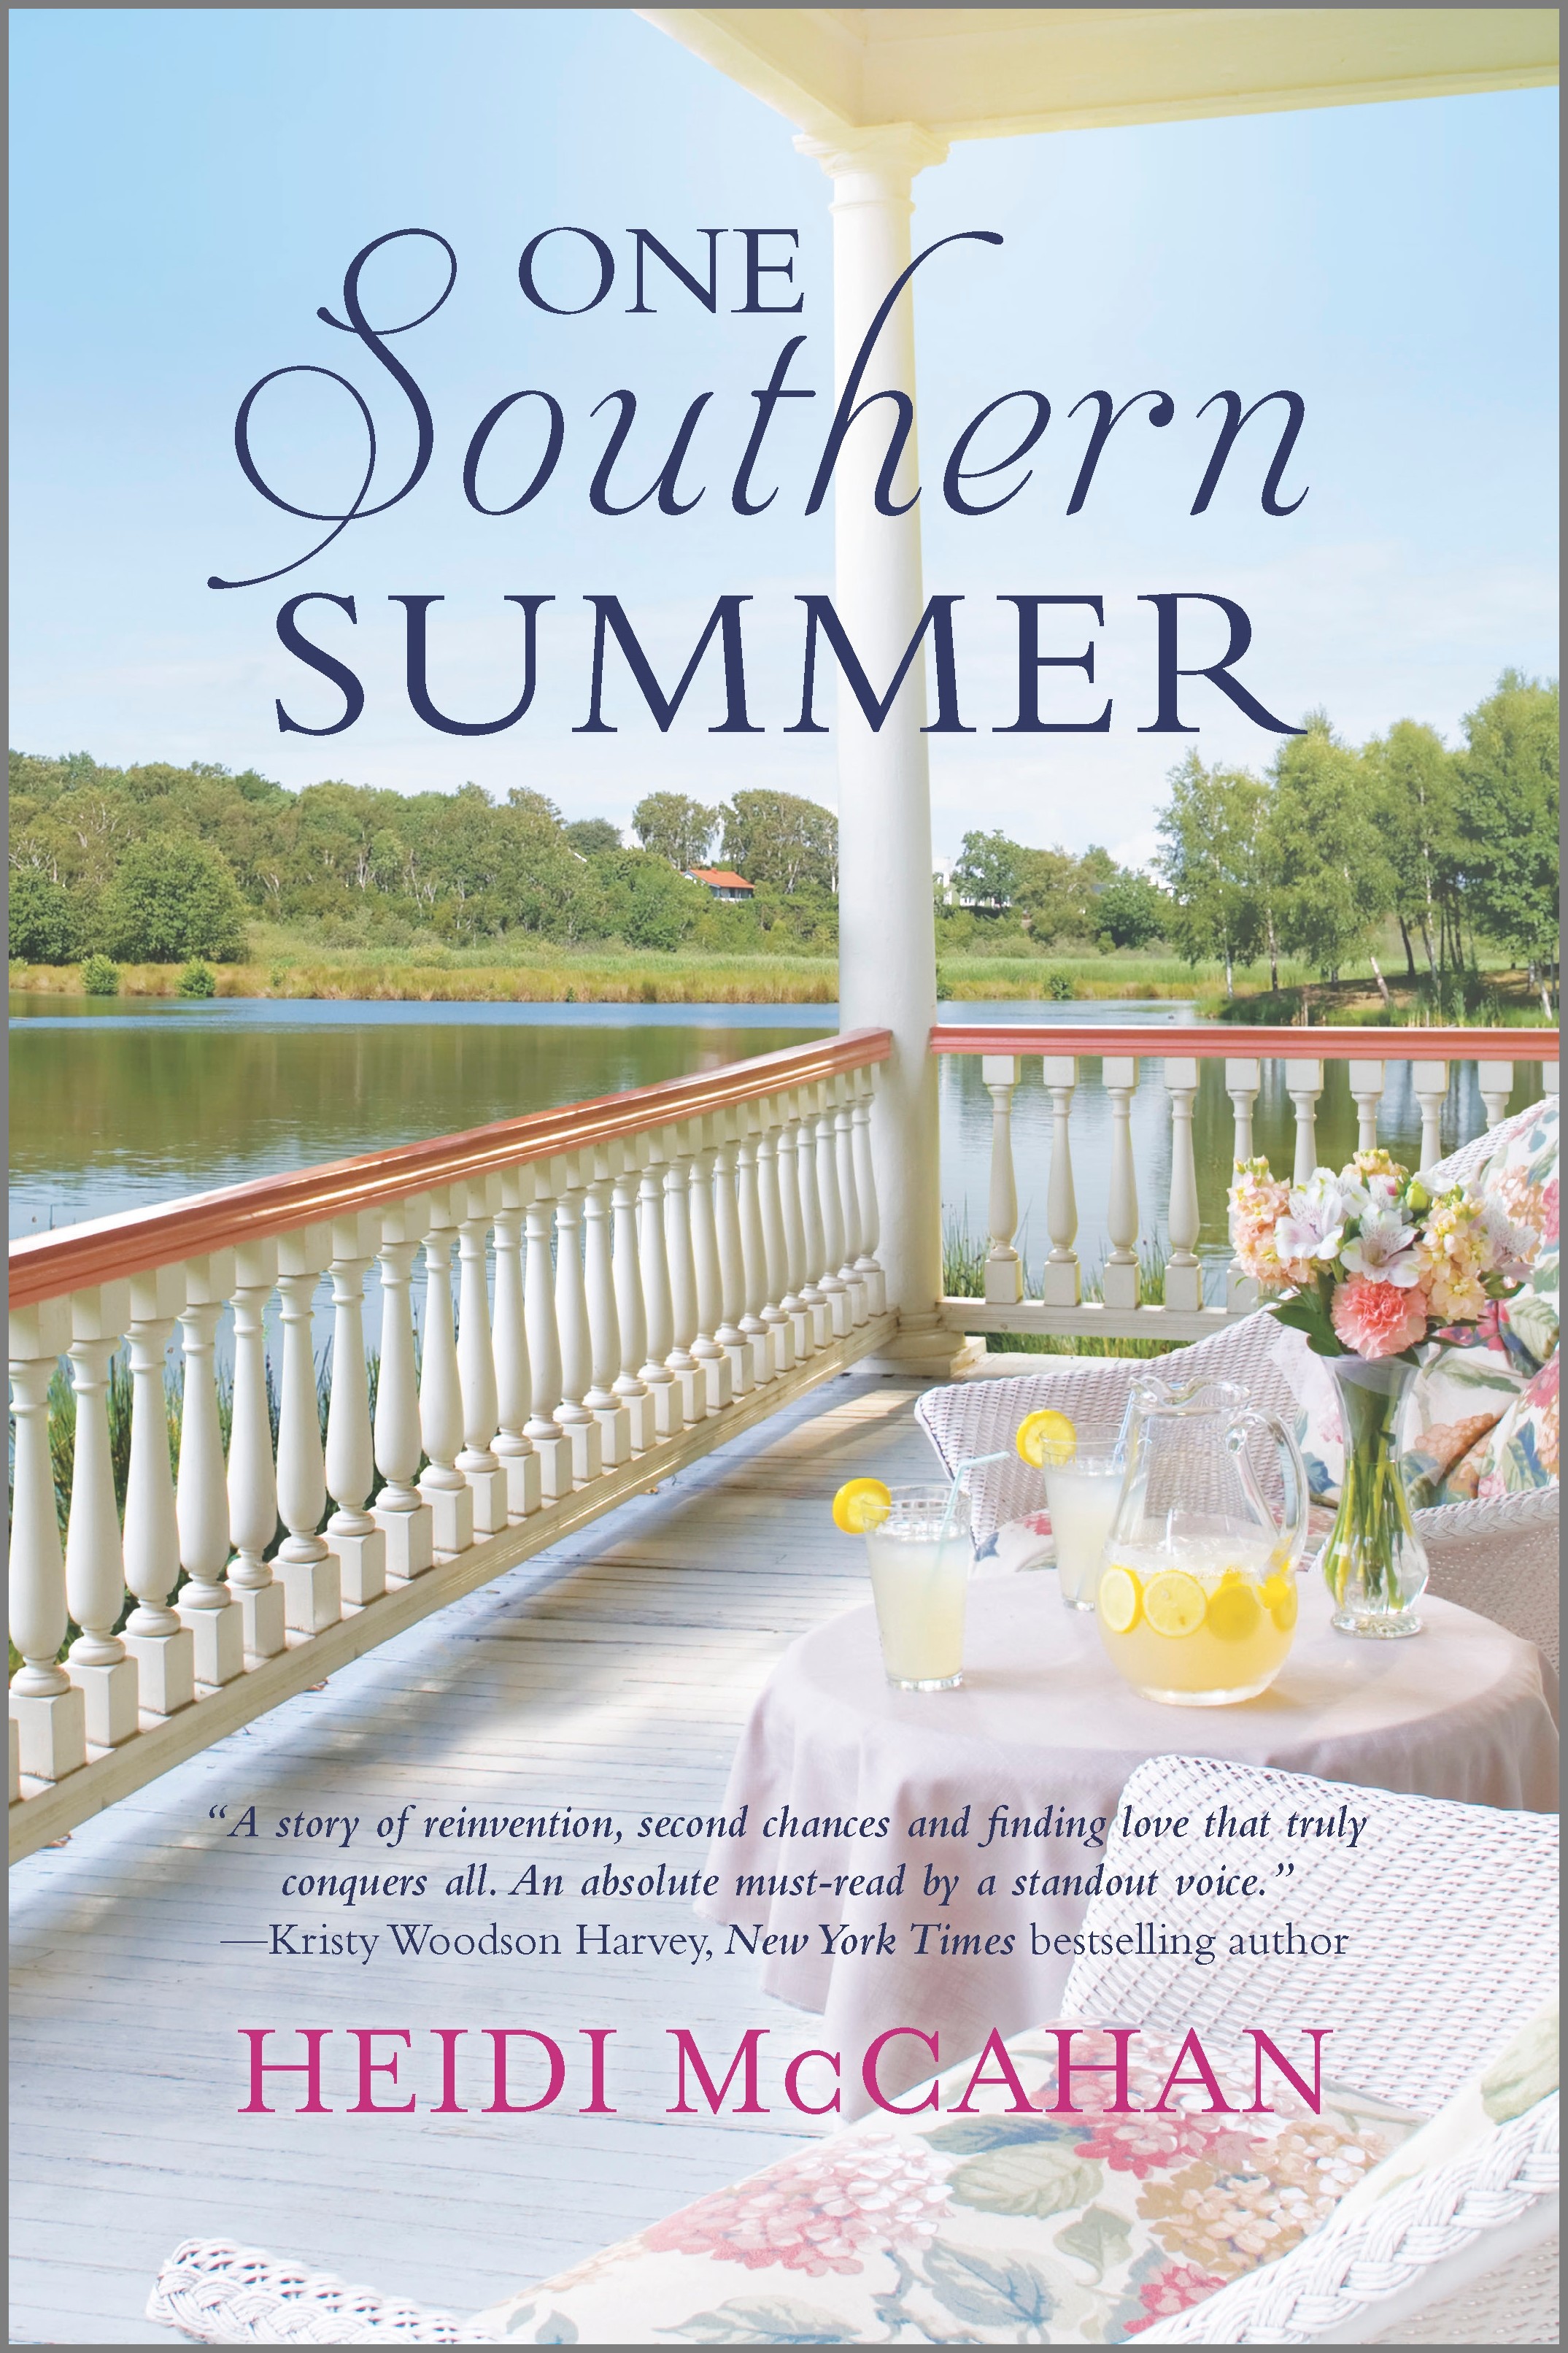 Cover image for ONE SOUTHERN SUMMER by Heidi McCahan, featuring a white wooden porch overlooking a lake. There is a table and chairs with lemonade on the porch